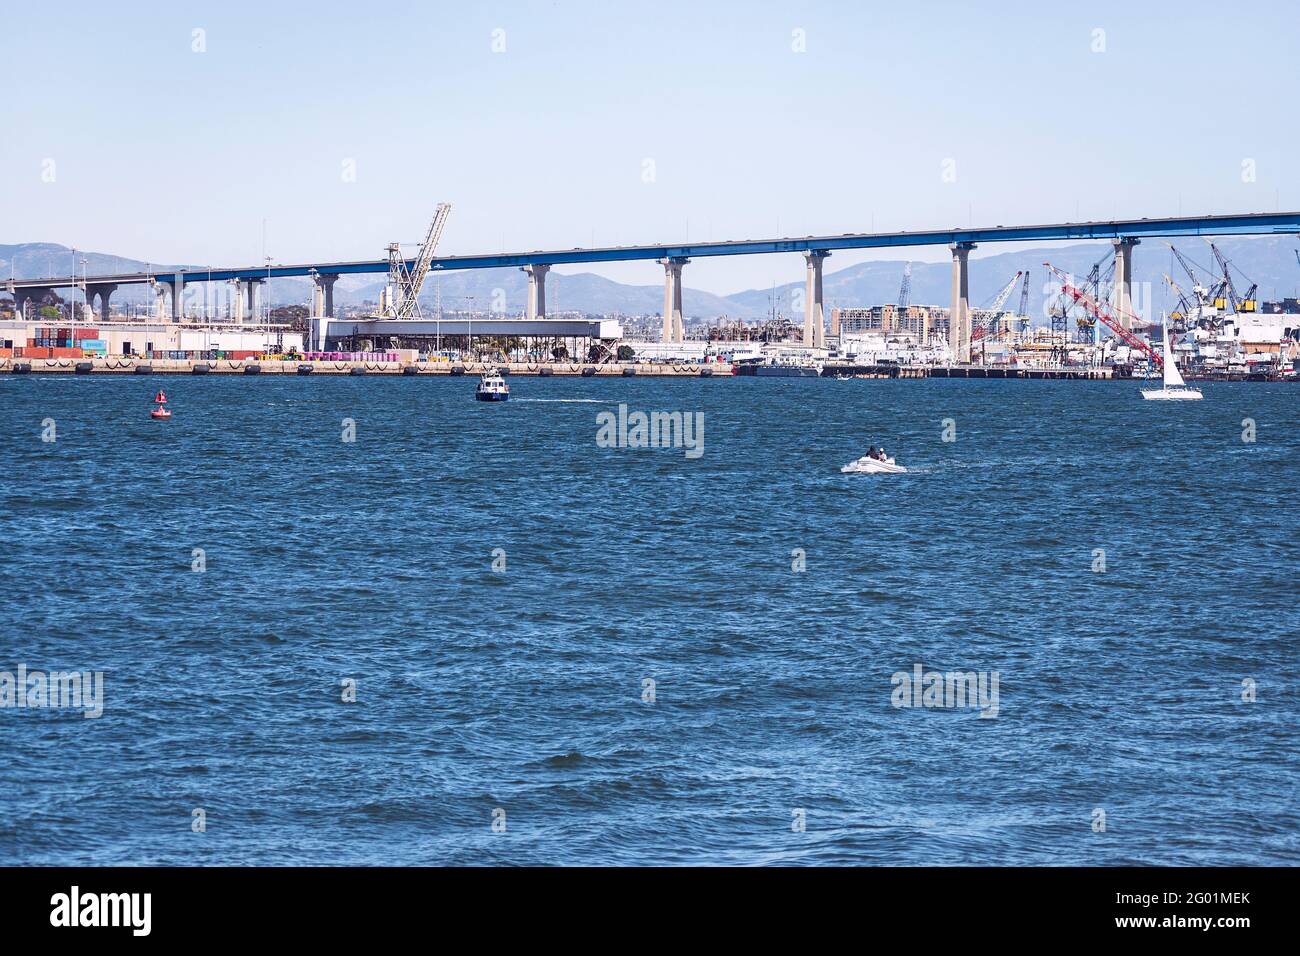 a section of the Coronado Bridge in San Diego showing shipyards under the bridge with mountains in the background and boats in the San Diego Bay in th Stock Photo